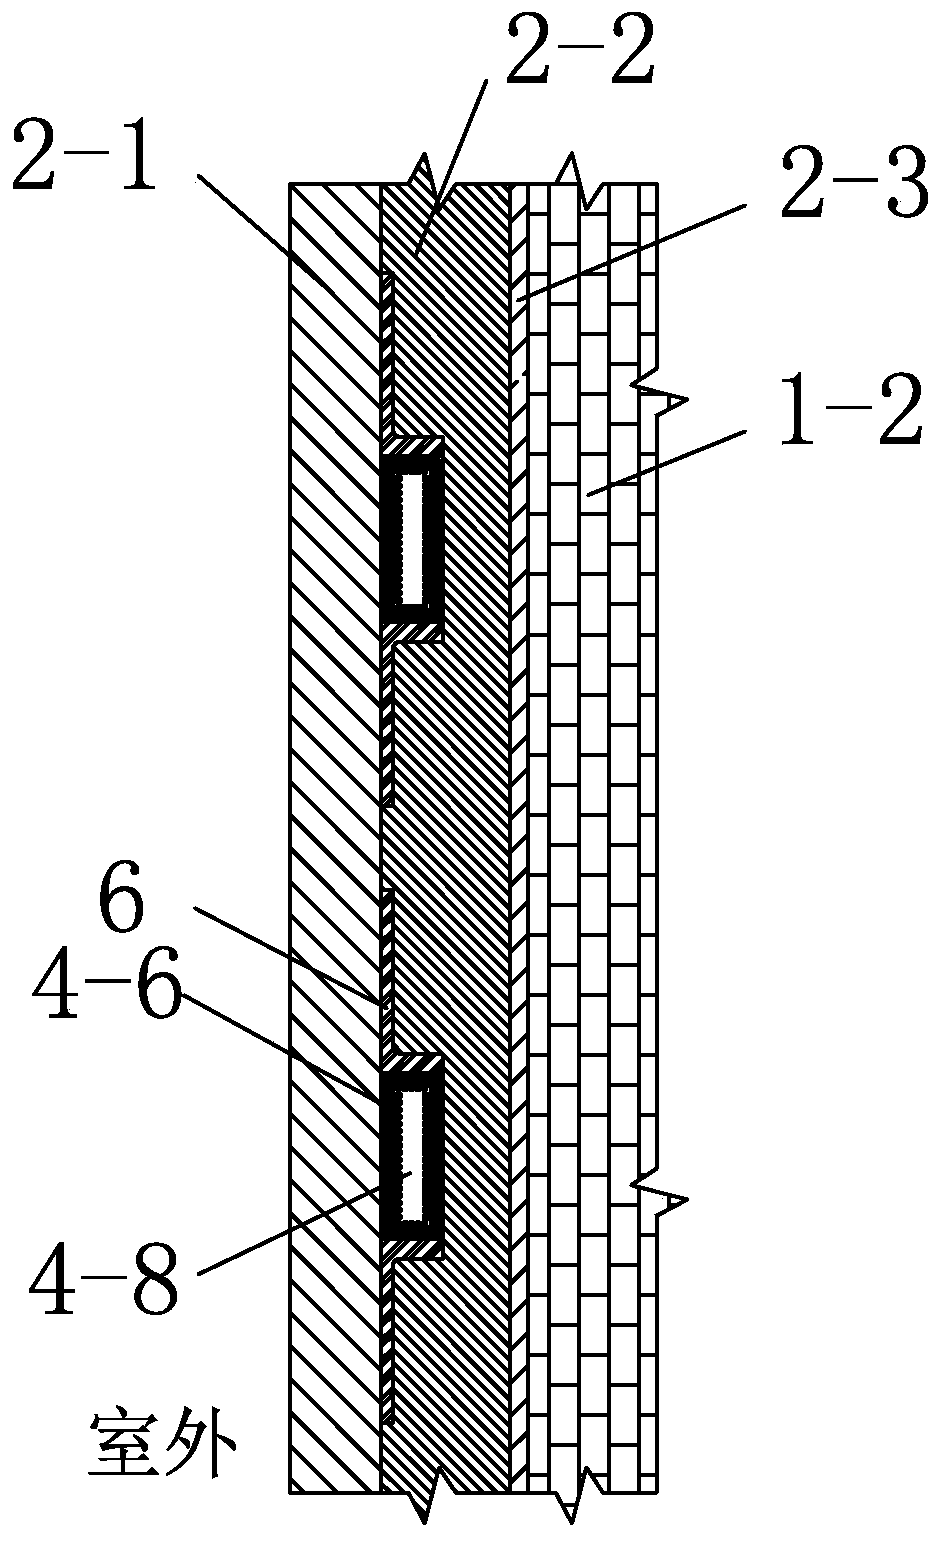 Composite wall for passive ultra-low energy buildings